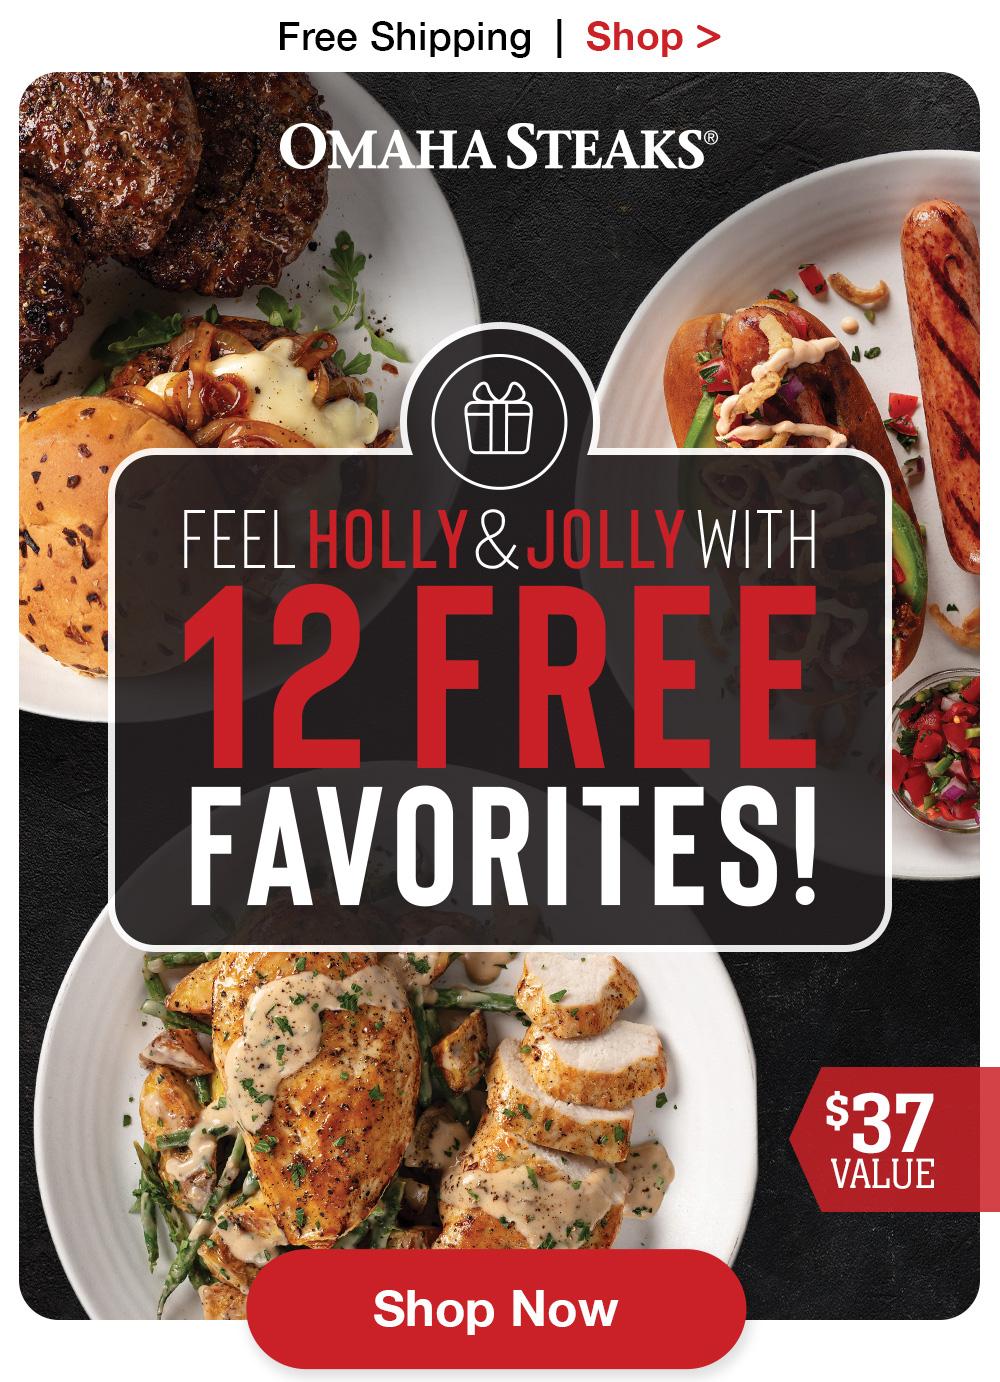 Free Shipping | Shop >  OMAHA STEAKS®  FEEL HOLLY & JOLLY WITH 12 FREE FAVORITES! - $37 VALUE - Shop Now